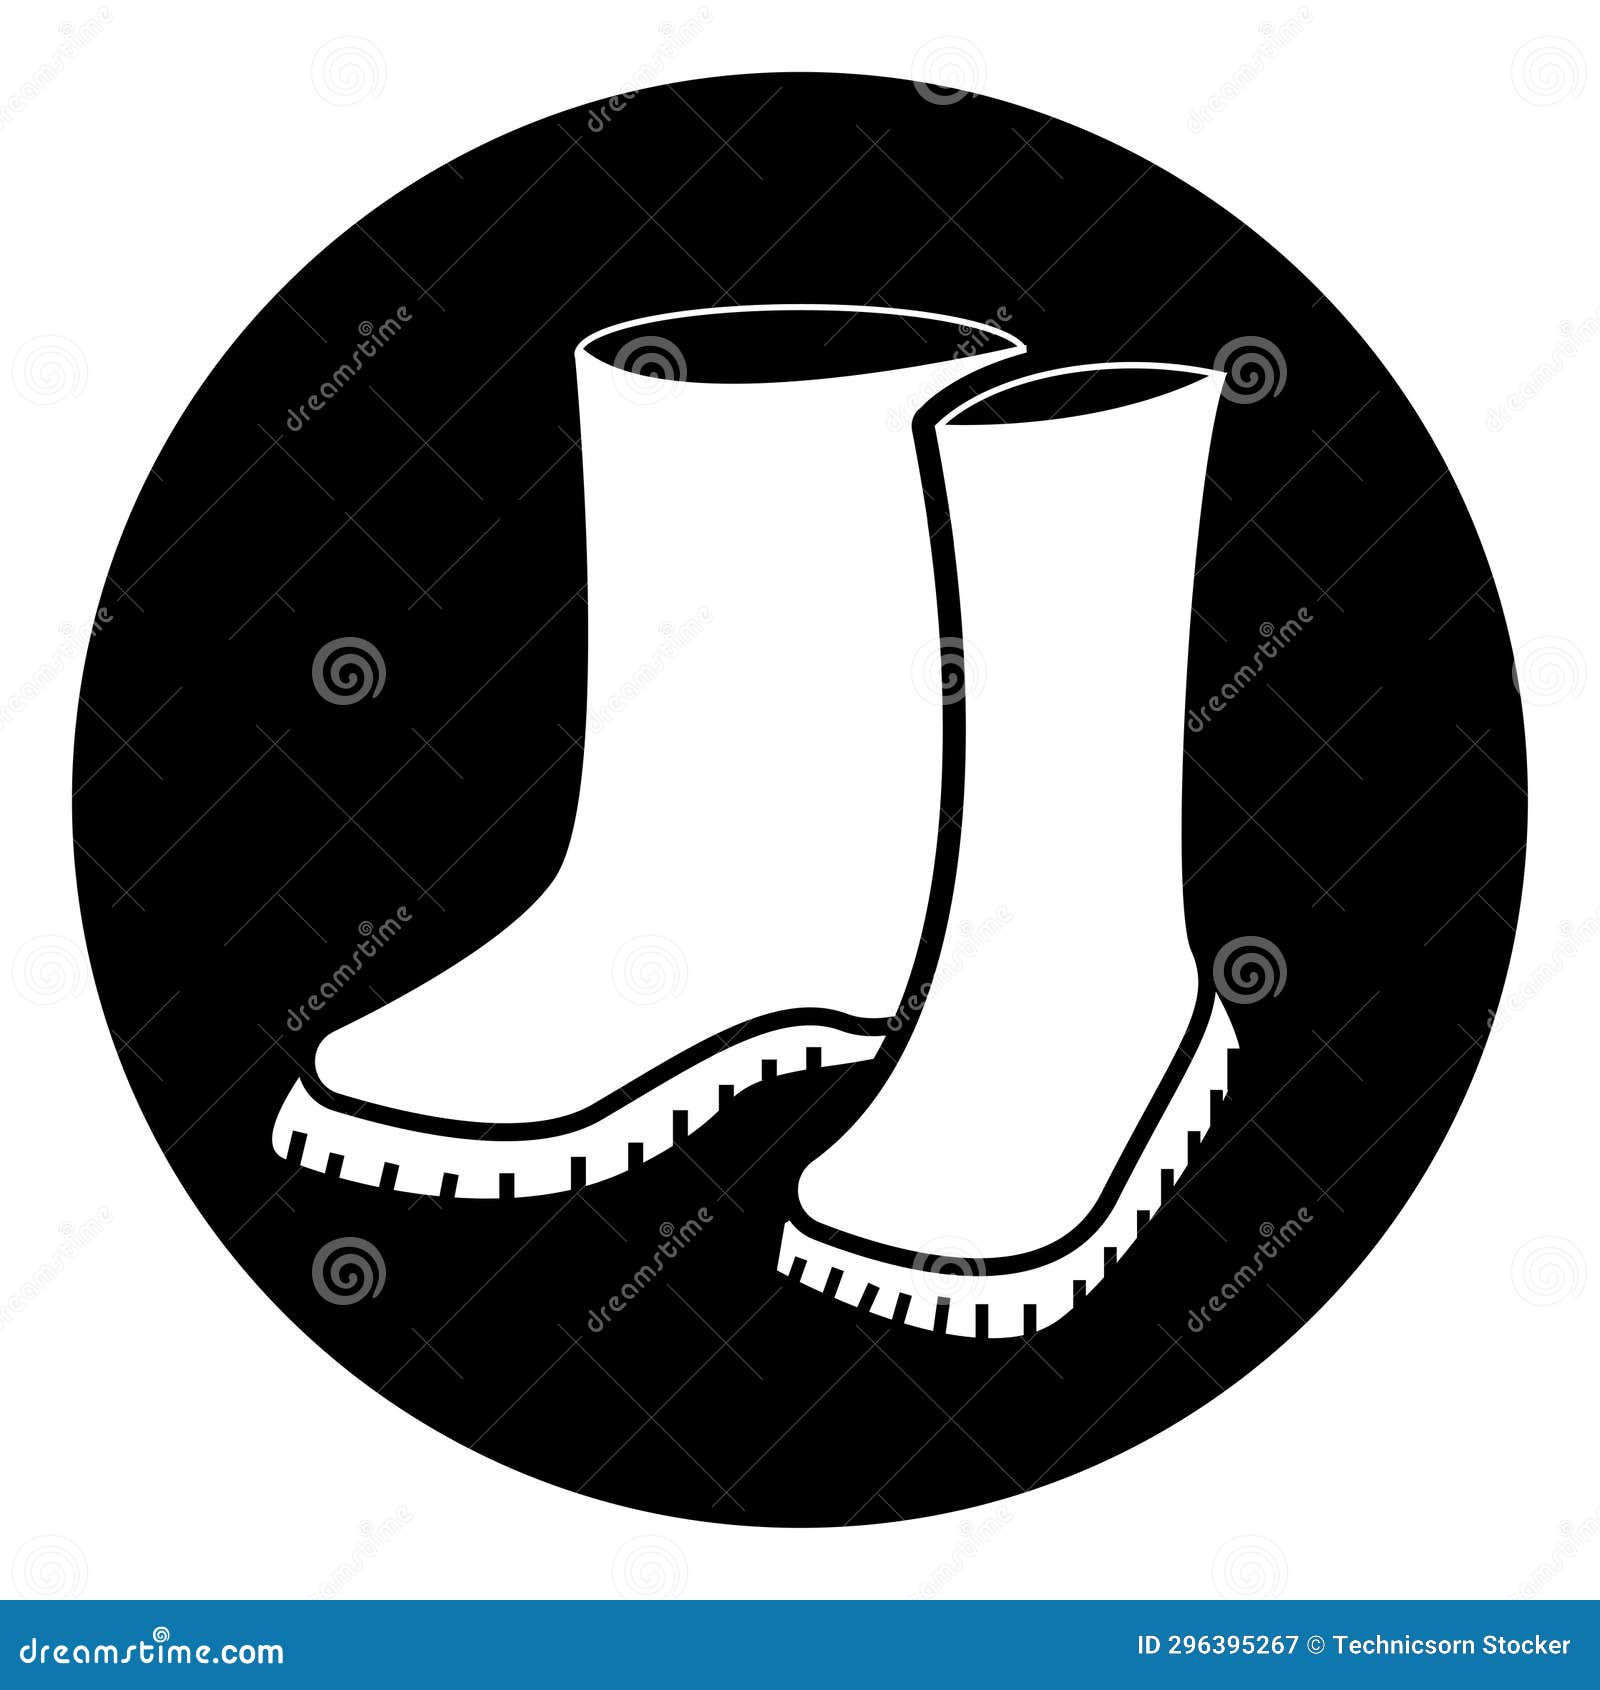 Wear Foot Protection Symbol Sign,Vector Illustration, Isolated on White ...